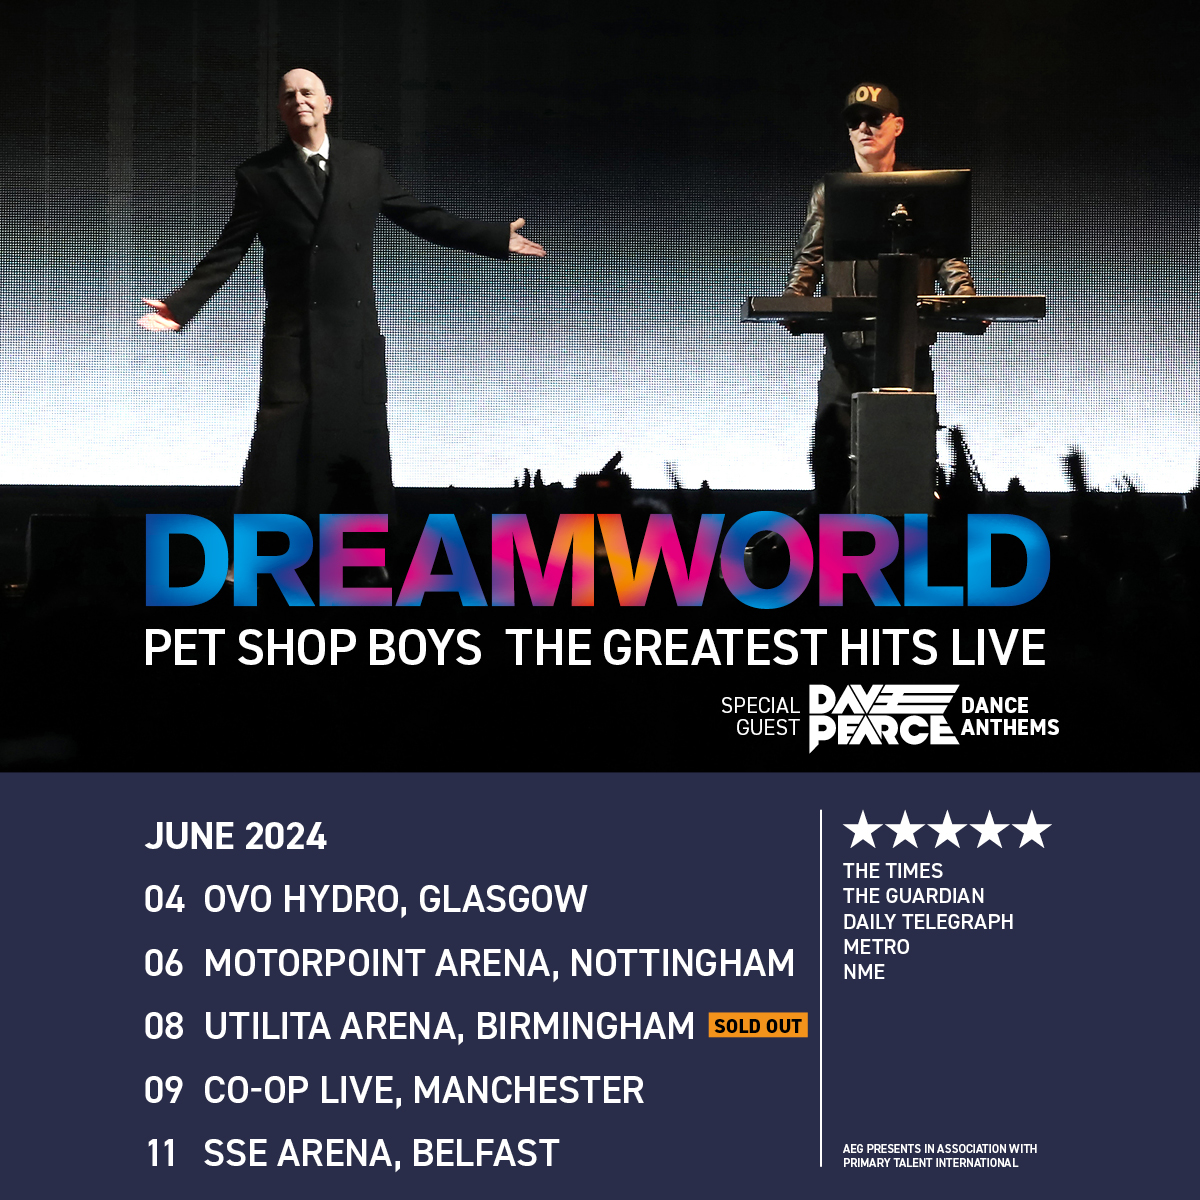 🎉🎶 @petshopboys head out on their #DREAMWORLD Greatest Hits Live tour in June 2024, with @dj_davepearce! Stops at @OVOHydro, @nottinghamarena, @UtilitaArenaBHM, Manchester's @TheCoopLive & @SSEBelfastArena! ⏰ Tickets are on sale now 🎫 w.axs.com/EXXE50Q4HLs